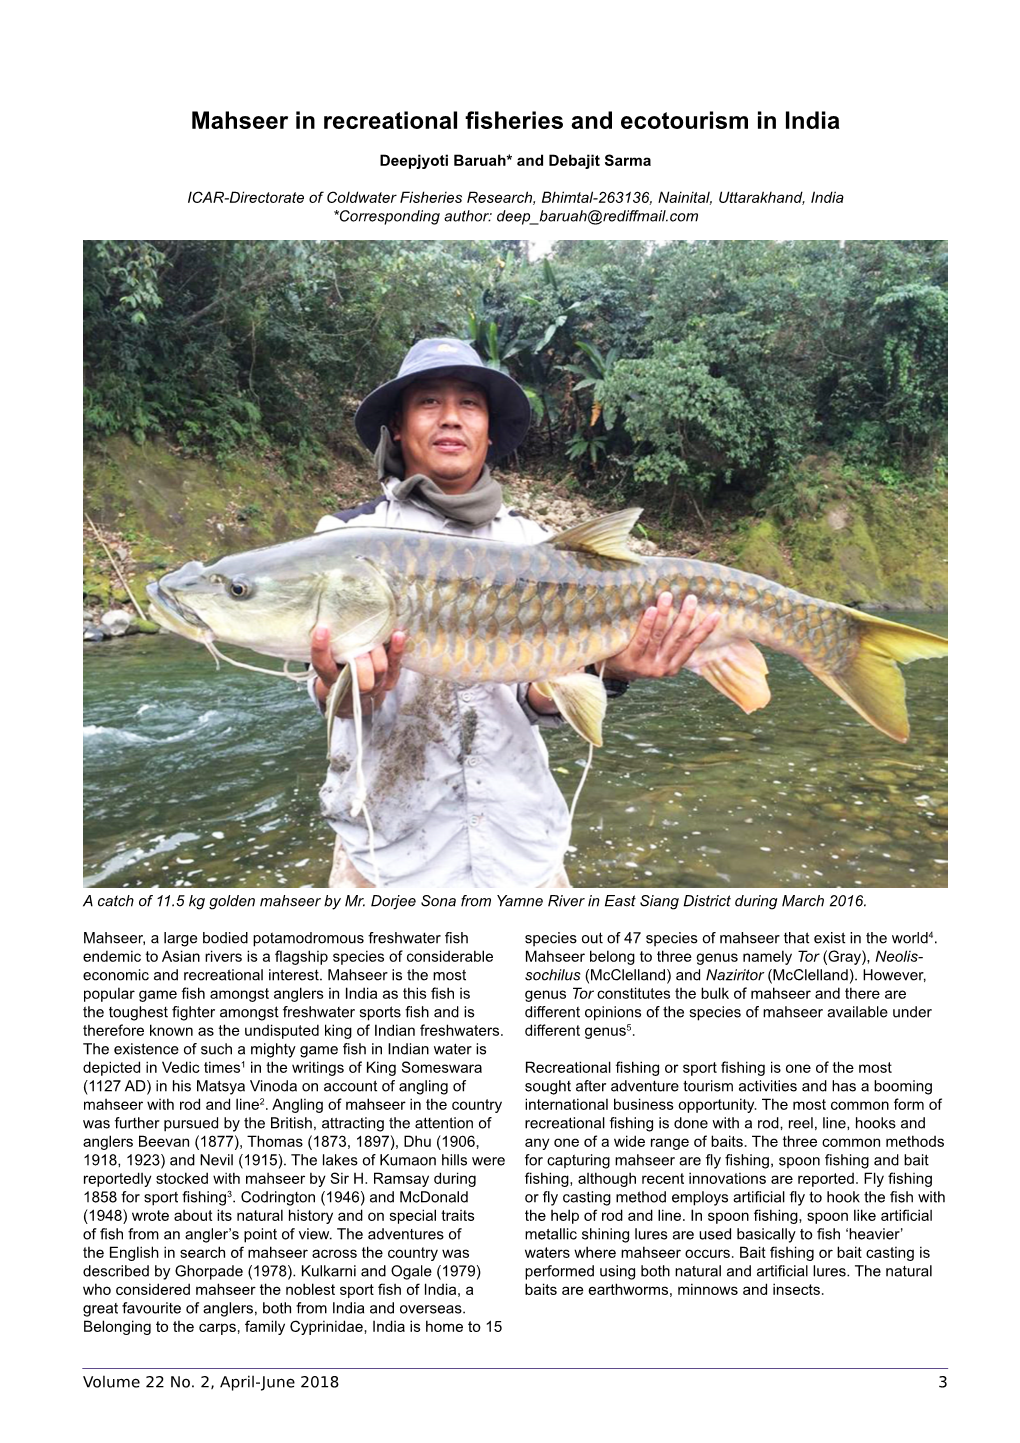 Mahseer in Recreational Fisheries and Ecotourism in India